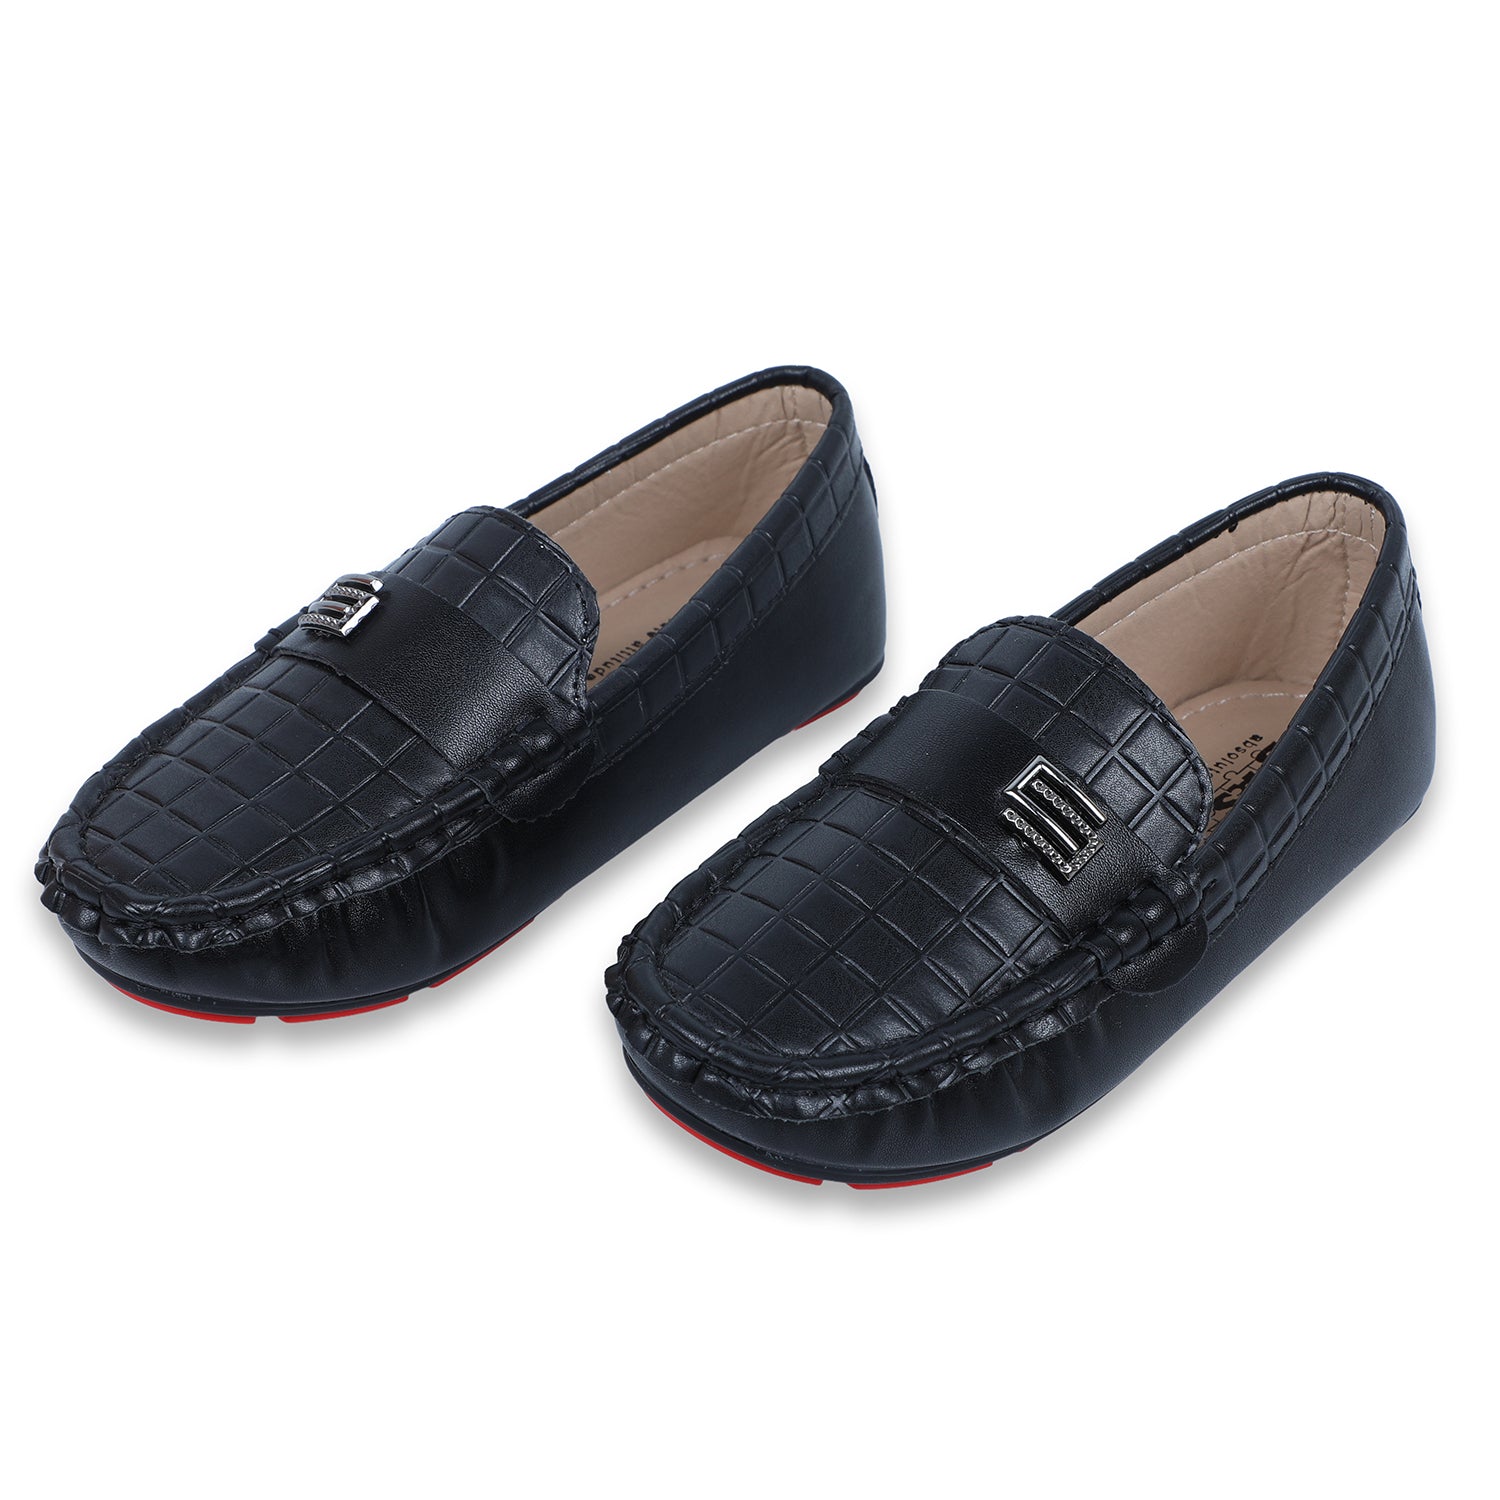 Baby Moo x Bash Kids Embossed Leatherite Loafer Shoes - Black